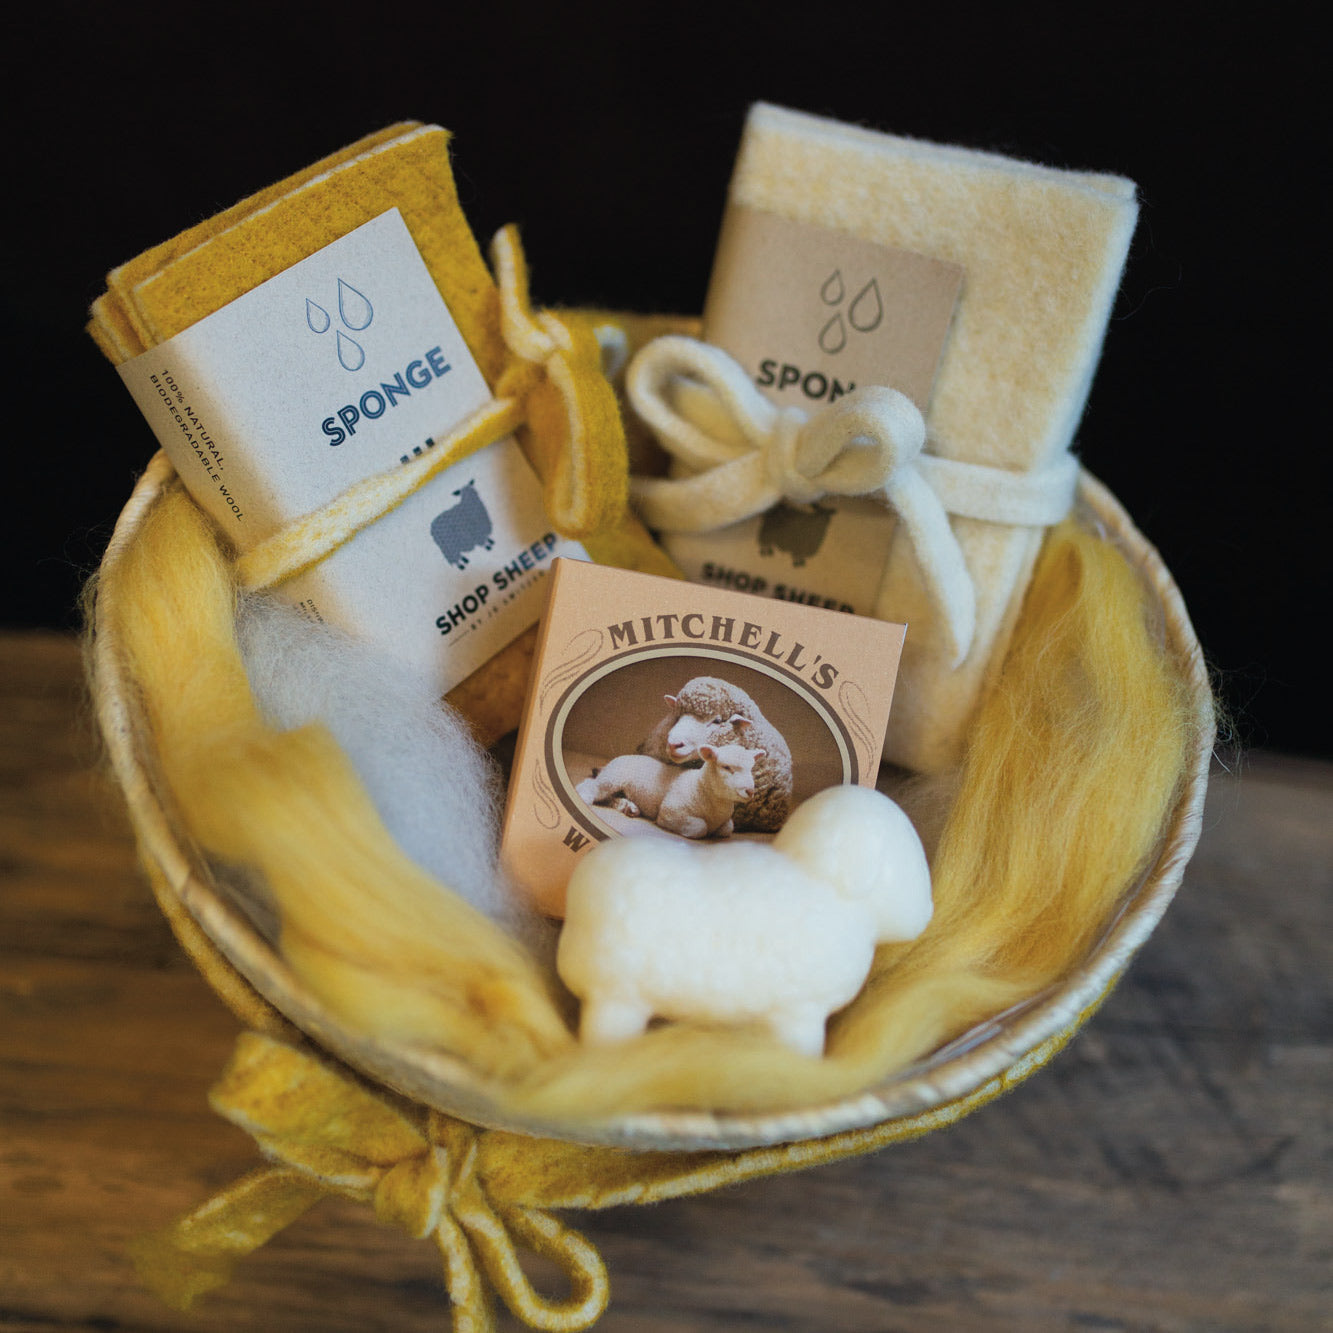 Baby Shower Gifts & Gift Baskets